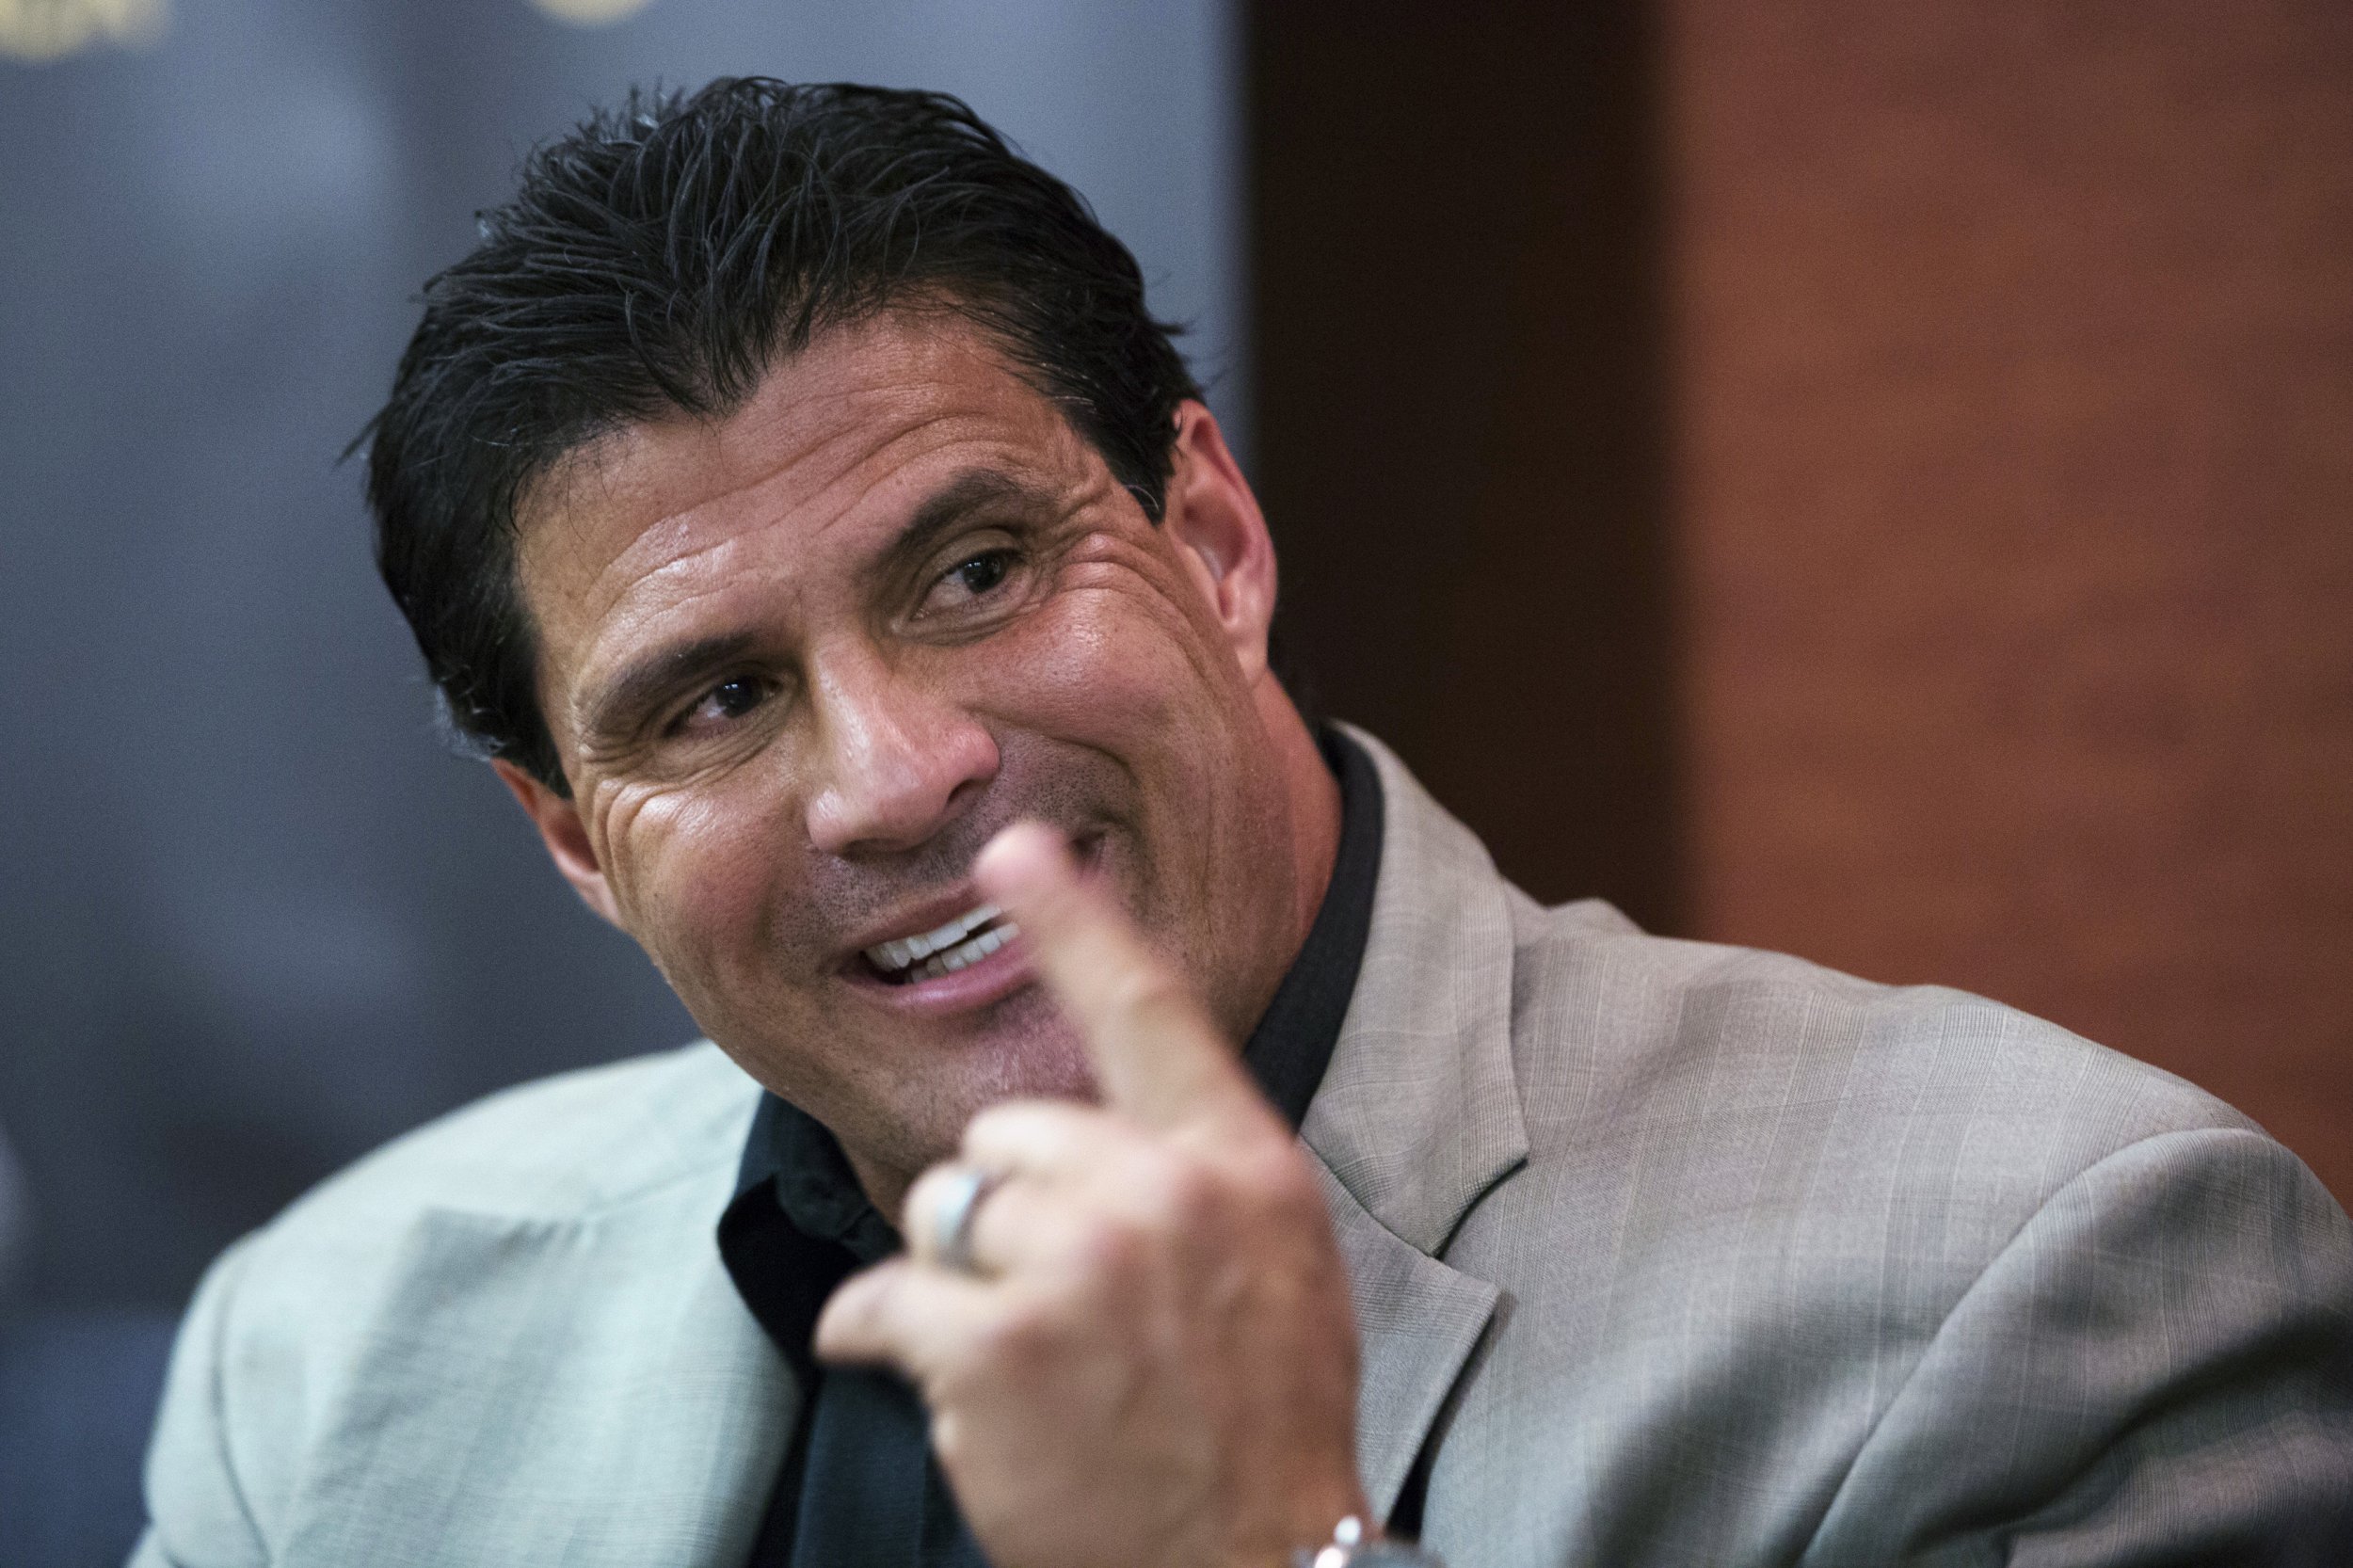 Jose Canseco tweets photo of wounded hand